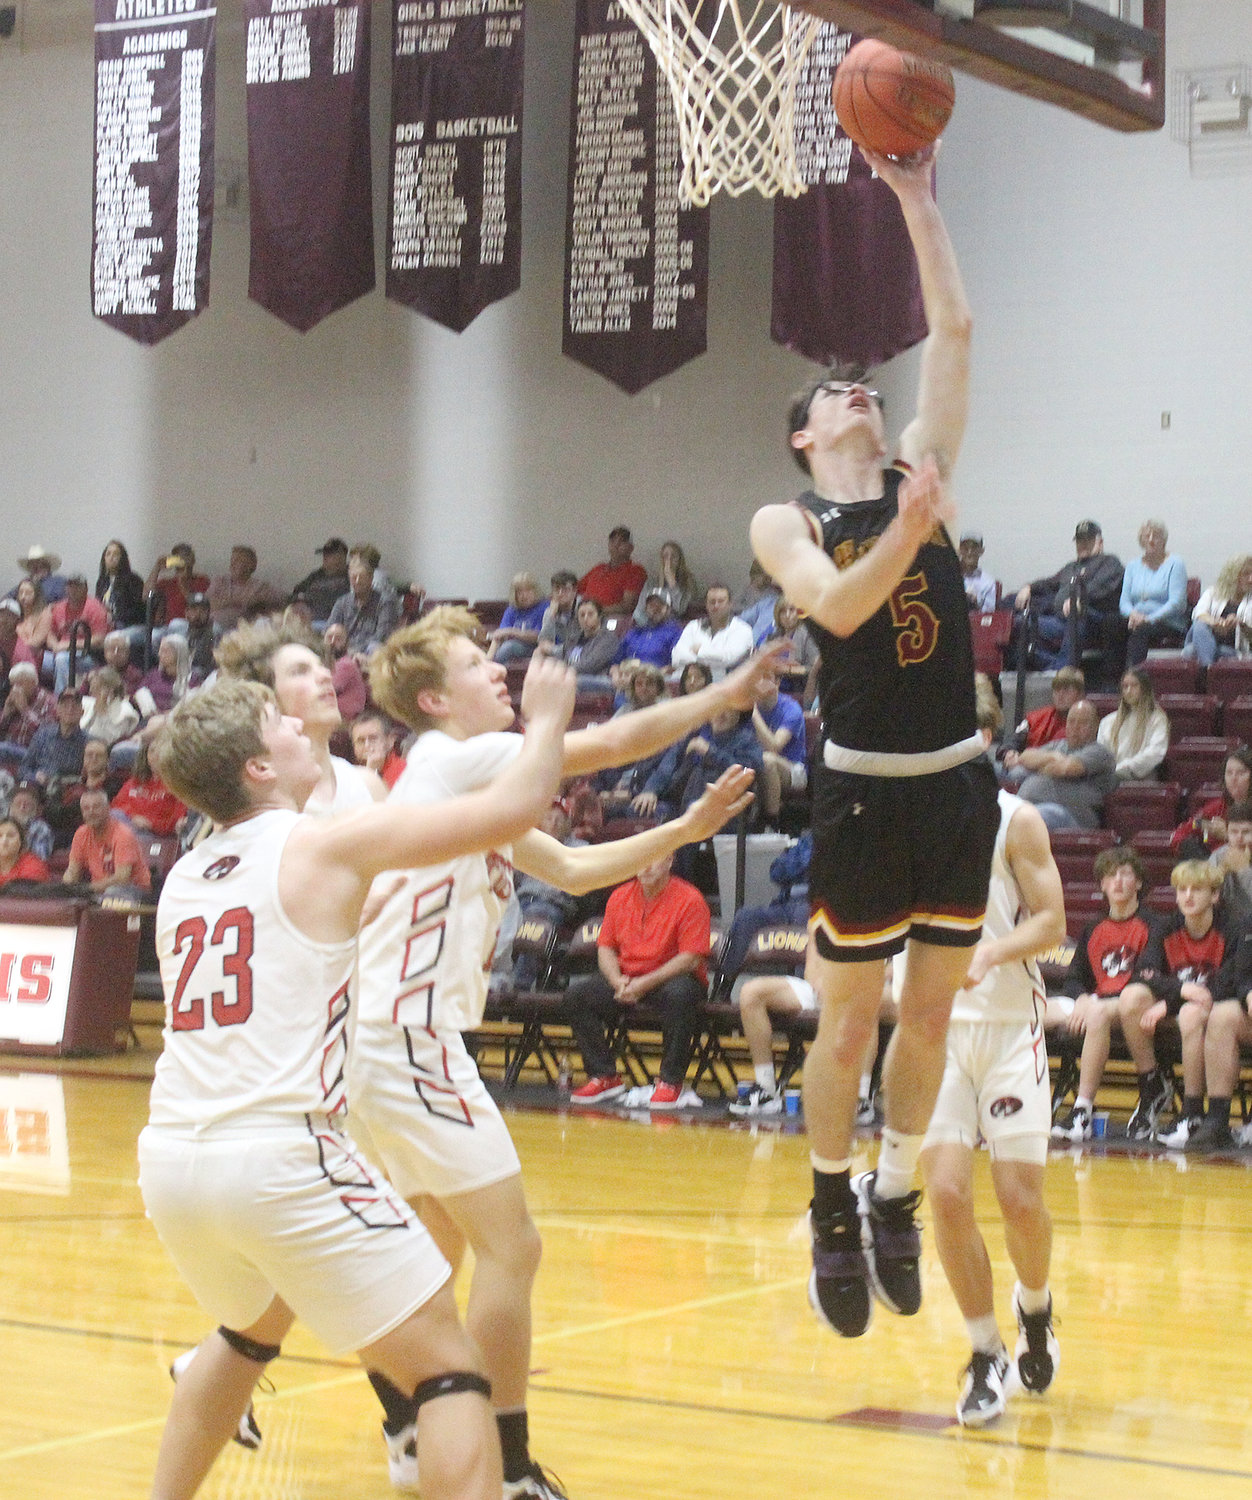 Mansfield’s Chase Kelley goes up for a lay-up against Houston in the third place game.